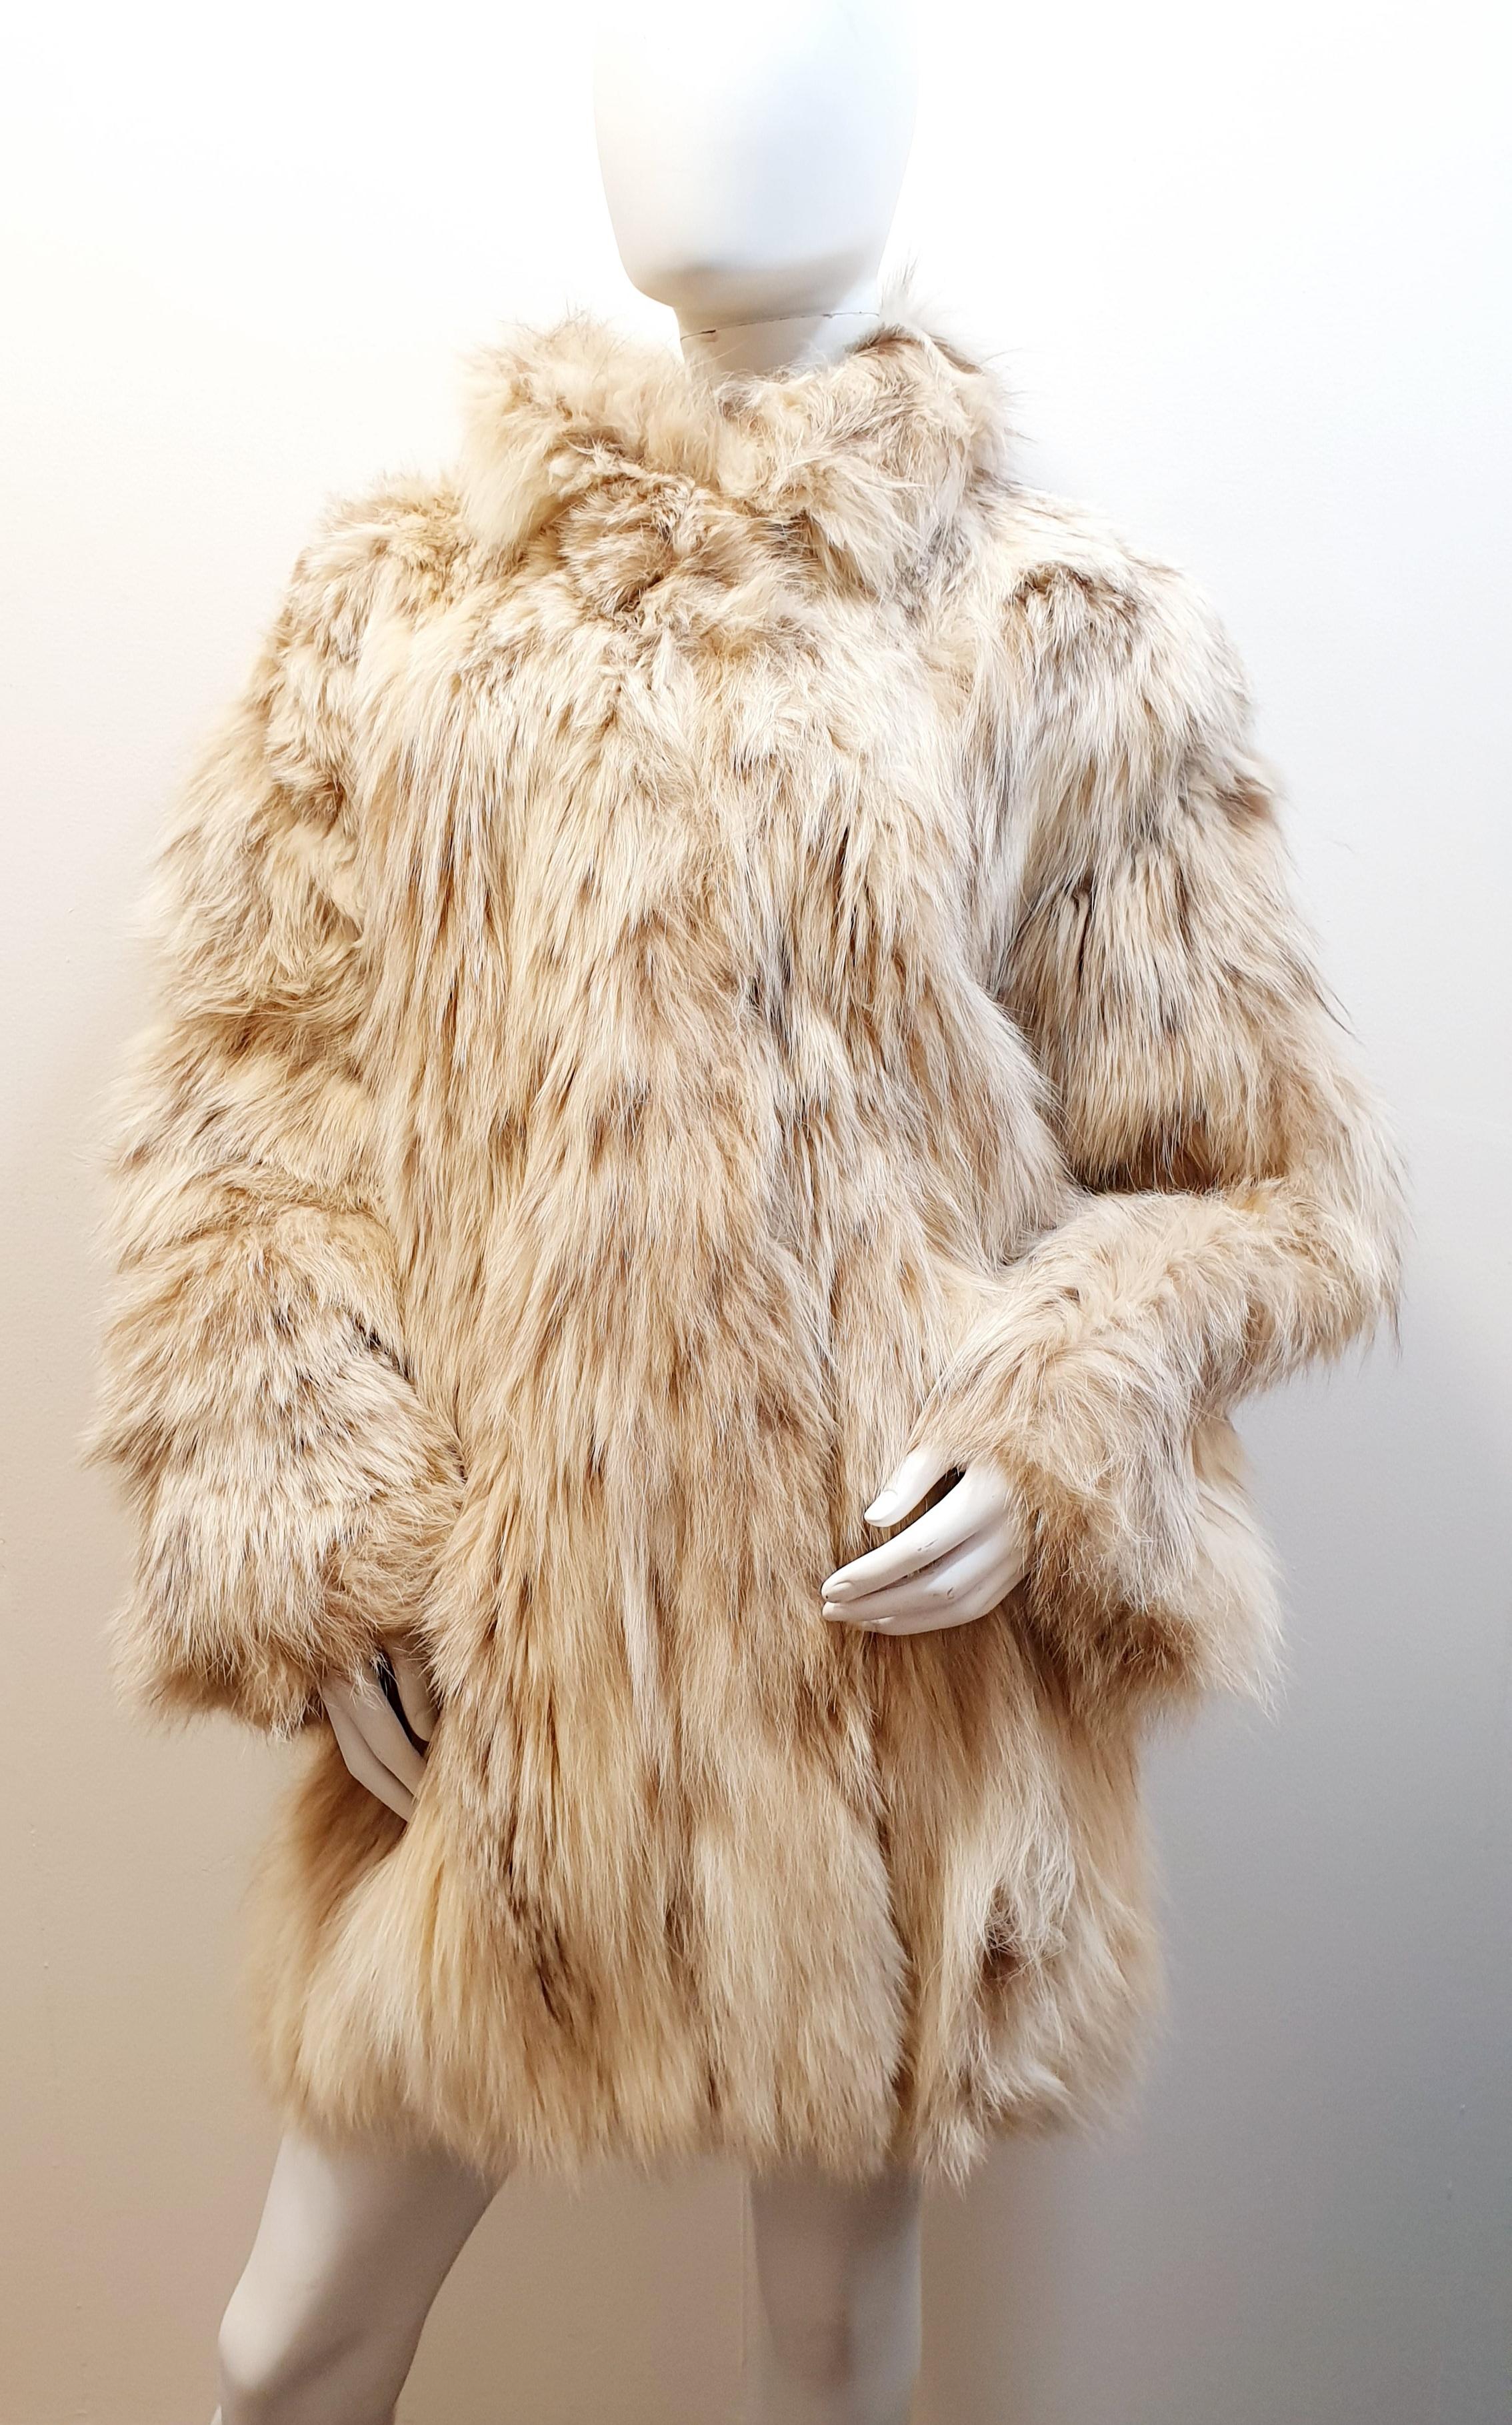 Elena Benarroch lynx fur coat
The coat has two pockets on the sides and one inside
The coat closure has three hooks
Elena Benarroch is a Moroccan-Spanish fashion designer born in Tangier in 1955 within a Moroccan Jewish family. She opened a